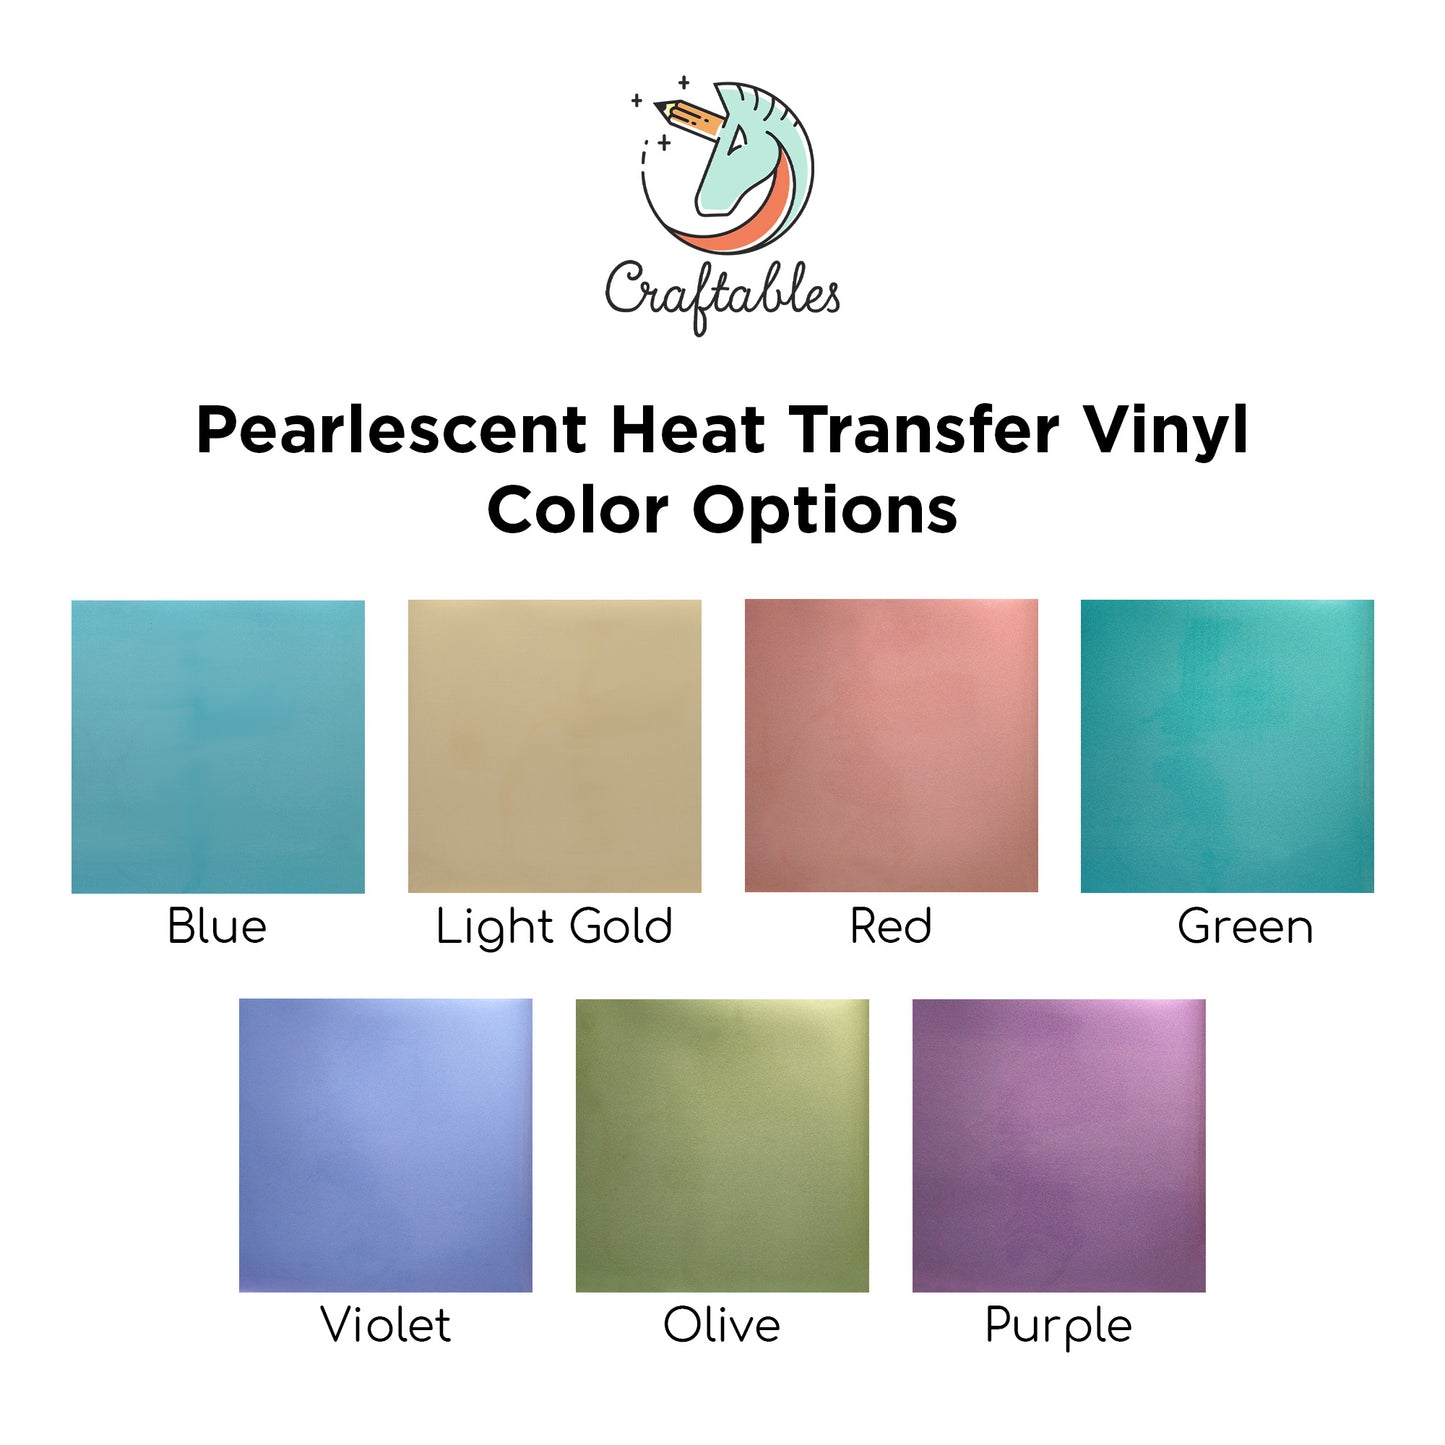 Purple Pearlescent Heat Transfer Vinyl Sheets By Craftables